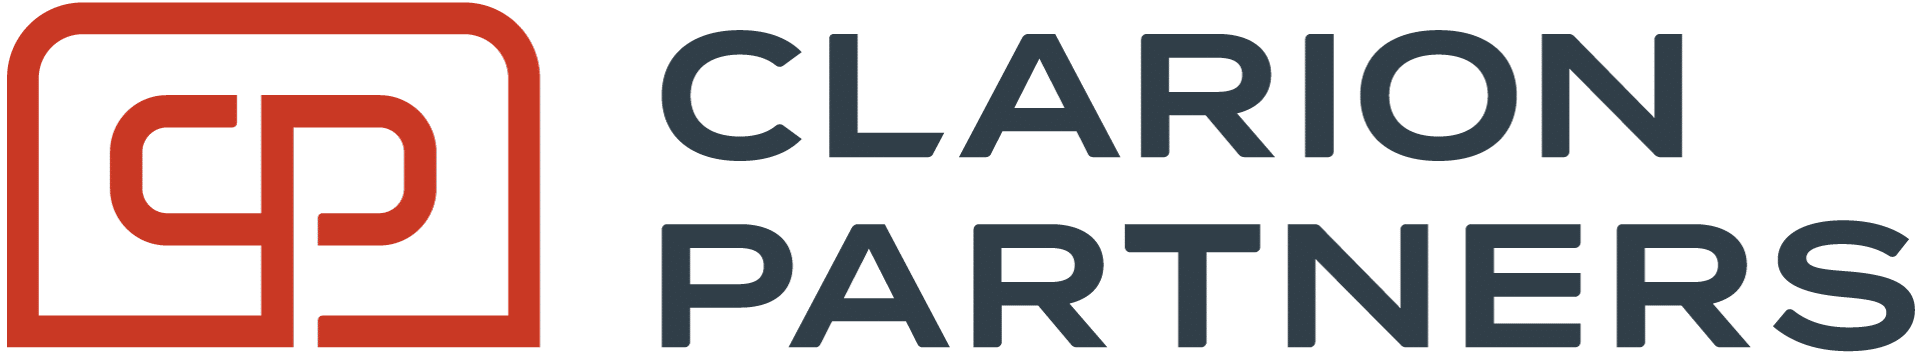 Clarion-Partners-Logo-stacked-positive-RGB